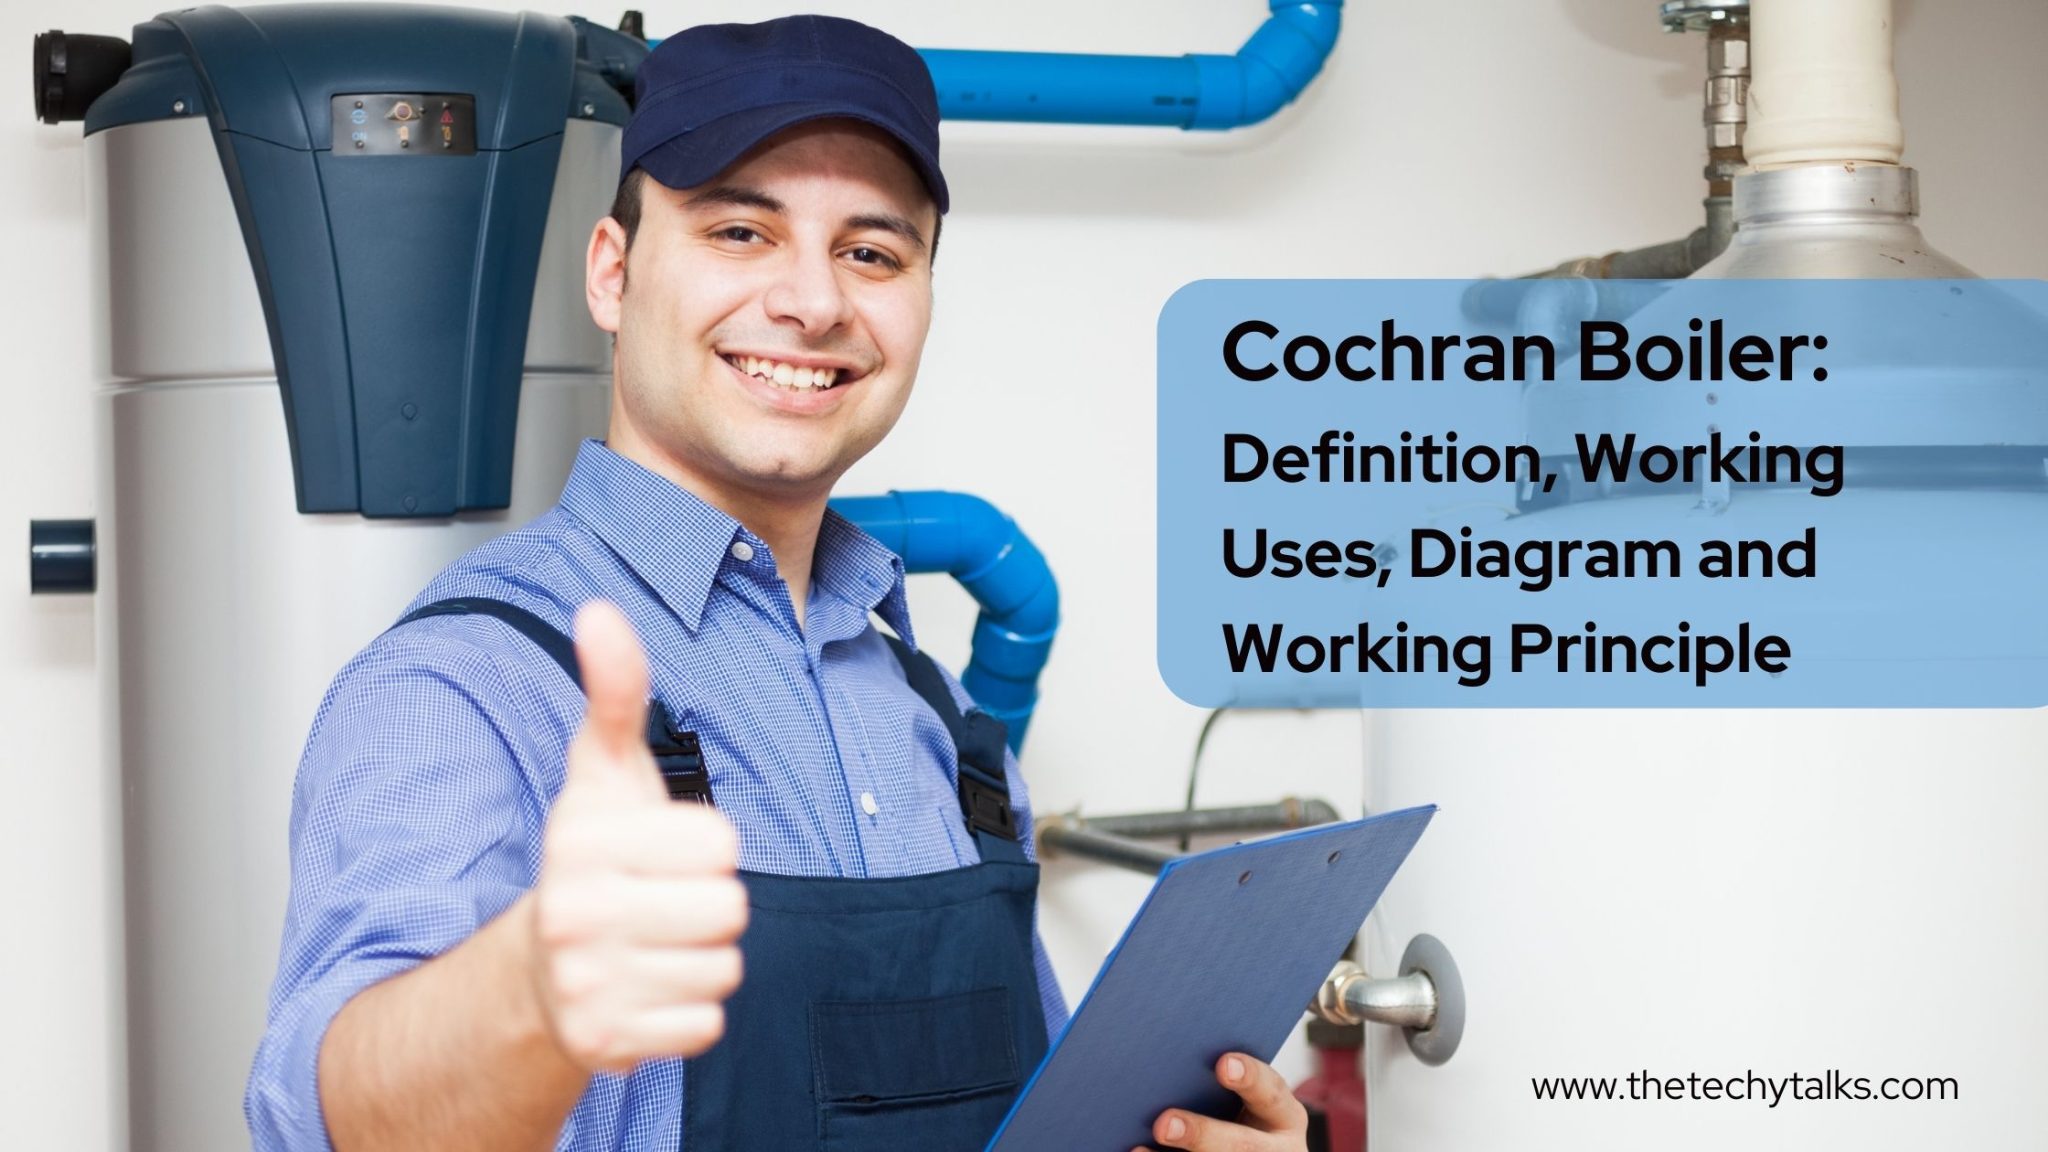 Cochran Boiler: Definition, Working, Uses, Diagram and Working Principle